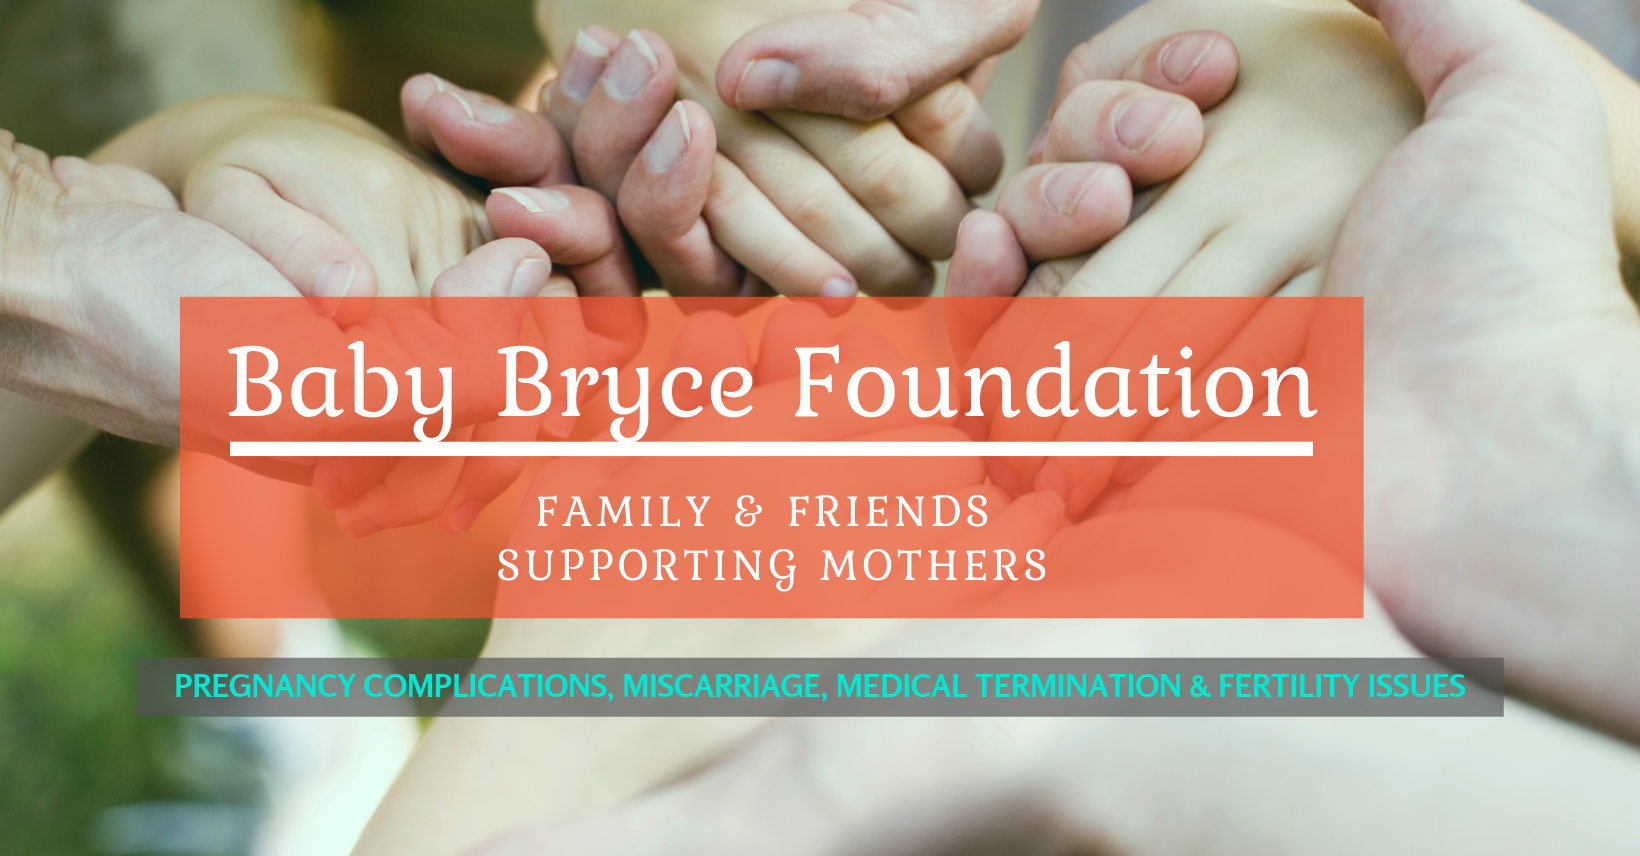 A support group for the friends and family of women experiencing pregnancy complications, miscarriage, facing medical termination or fertility difficulties. 